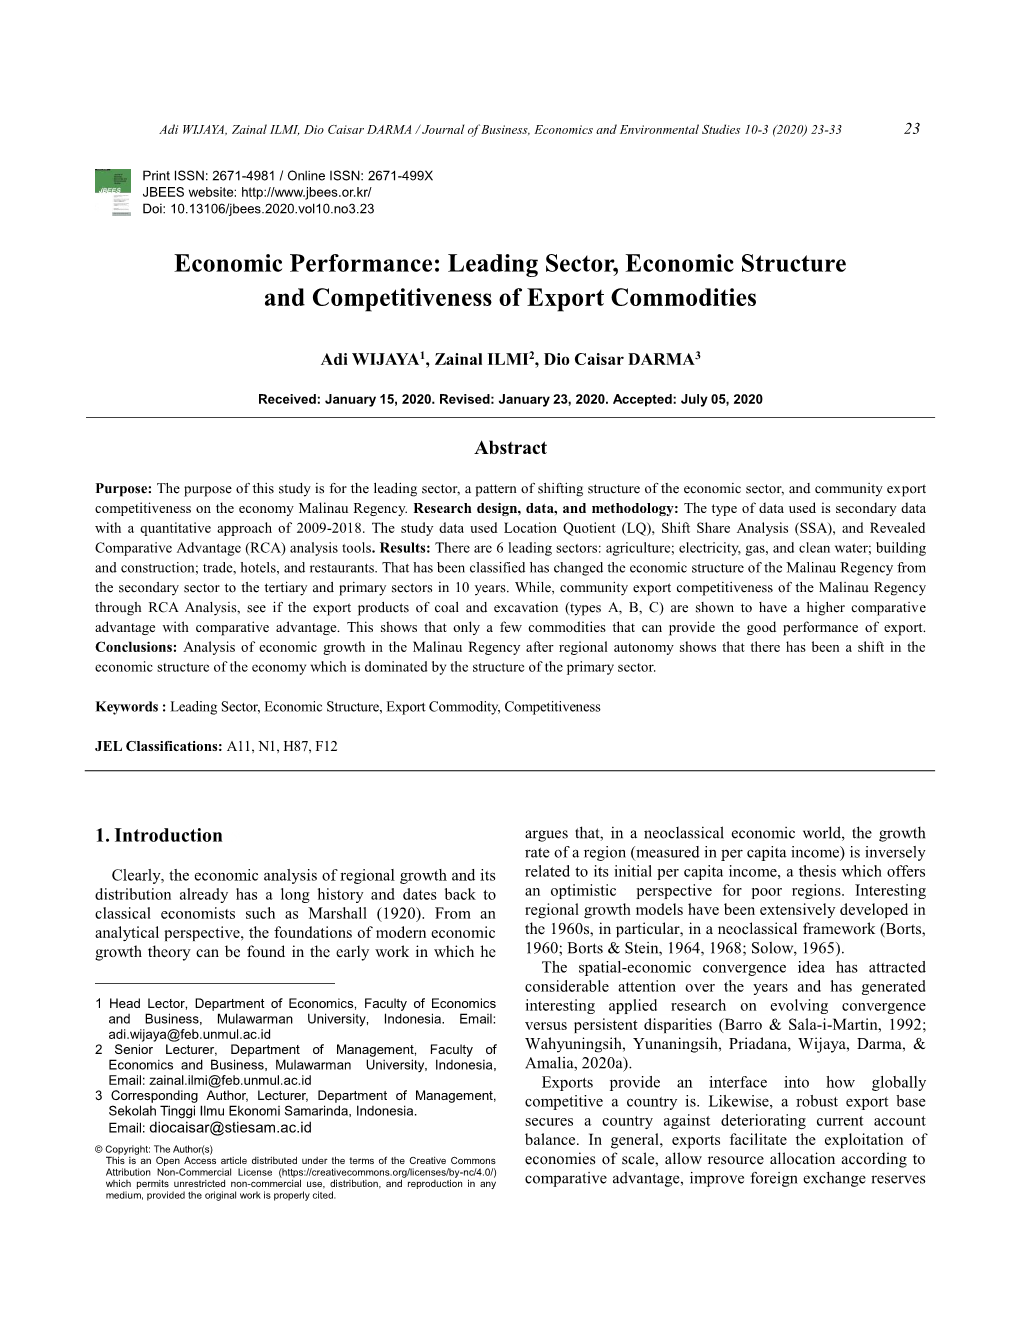 Leading Sector, Economic Structure and Competitiveness of Export Commodities